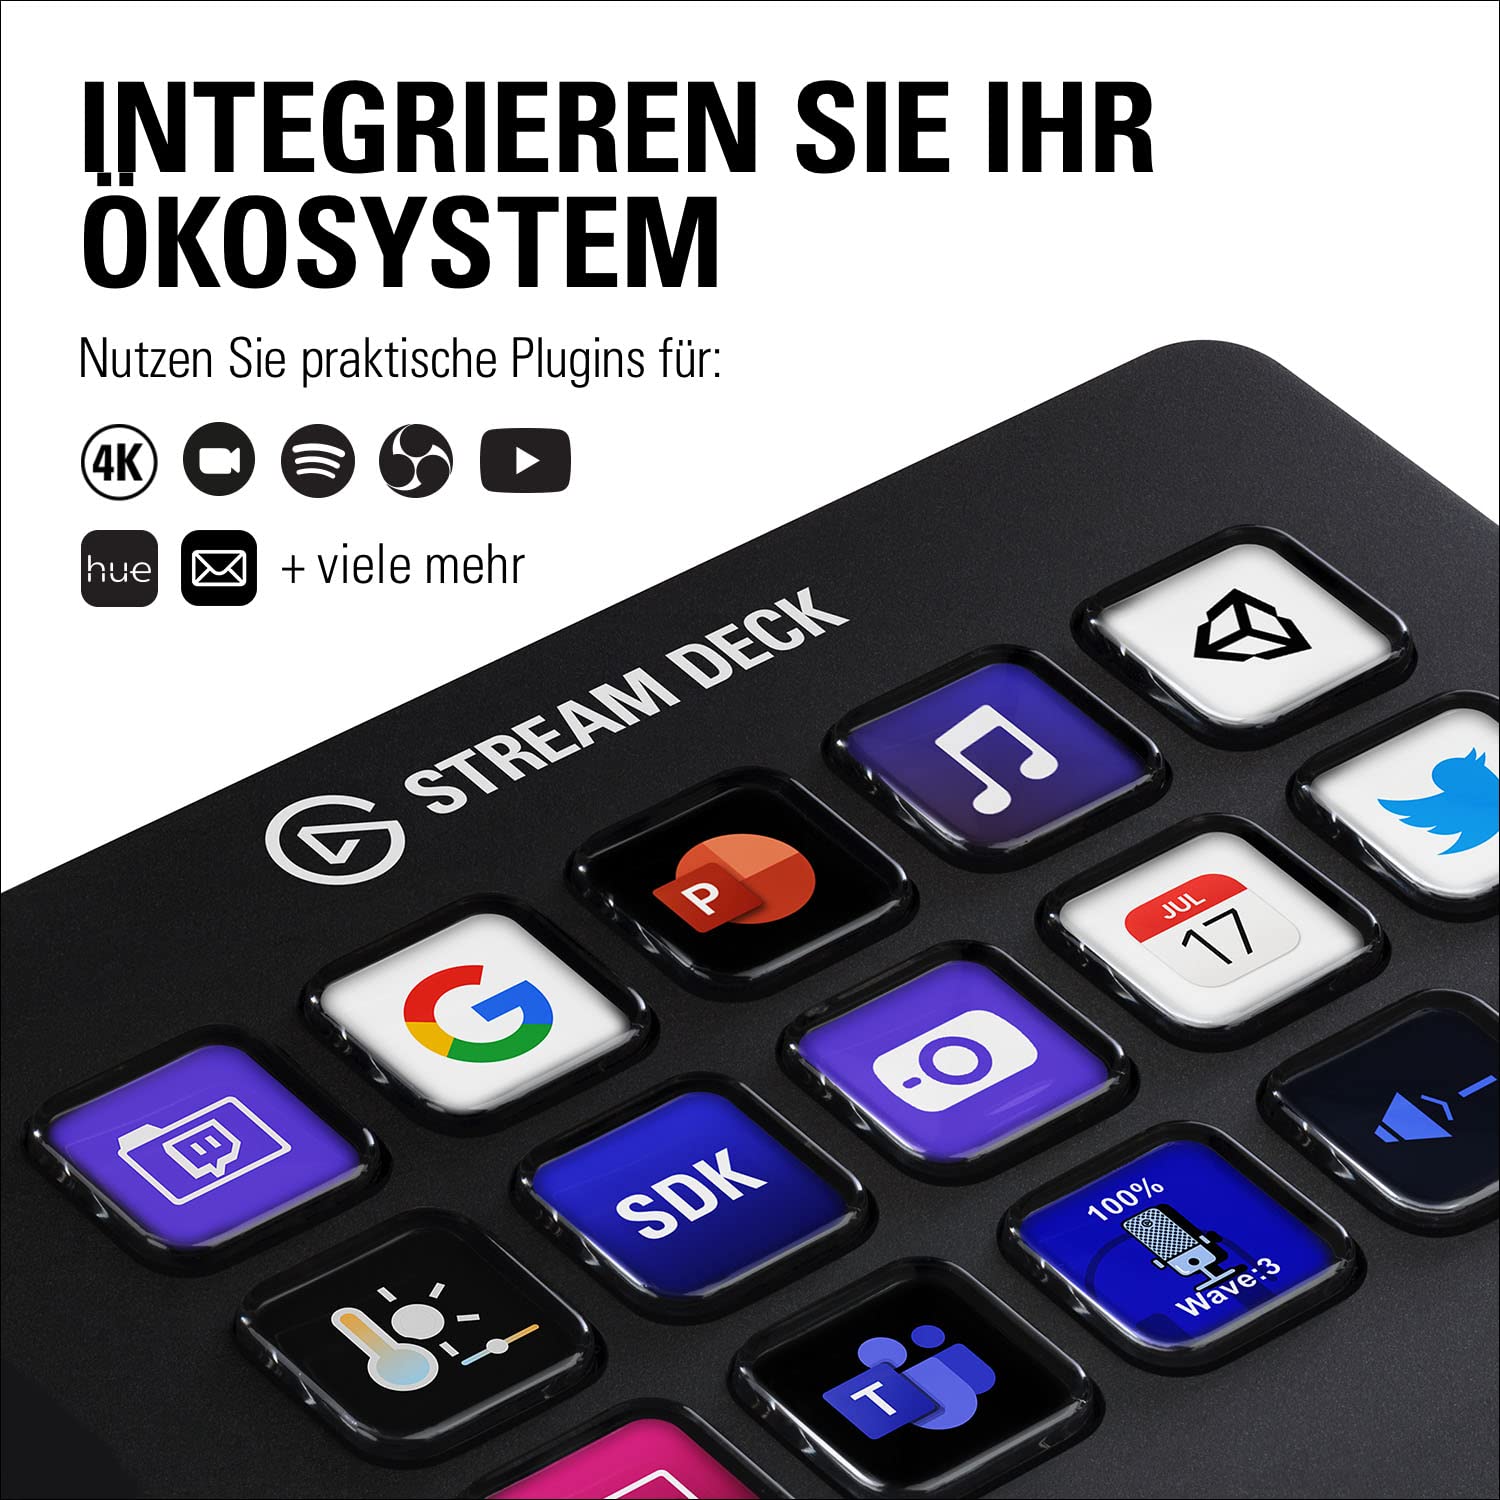 Mua Elgato Stream Deck  - Studio Controller, 15 Macro Keys, Triggering  Action in Apps and Software such as OBS, Twitch, YouTube and More, for Mac  and PC trên Amazon Đức chính